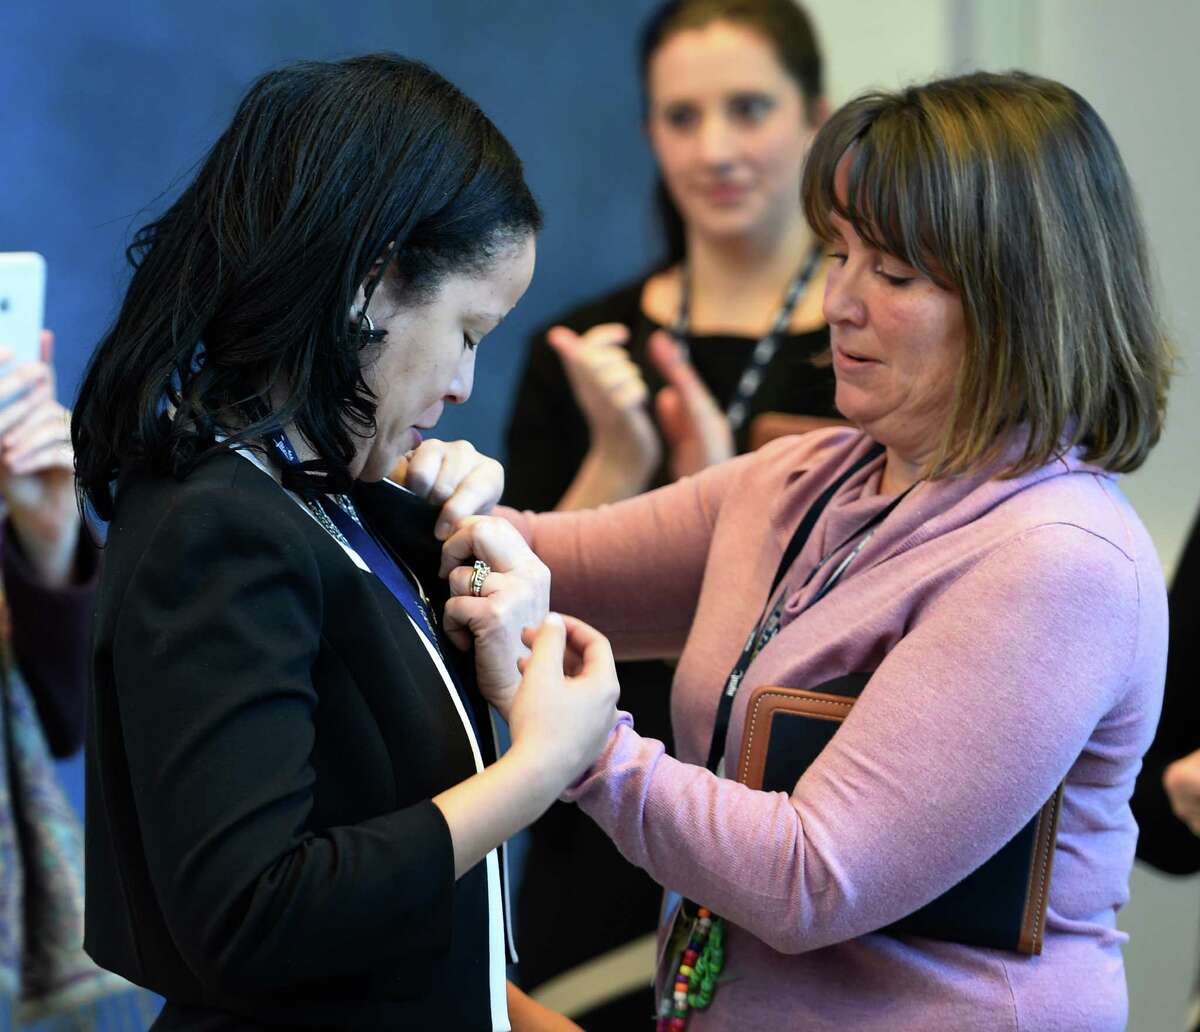 Zeonadis Tavarez receives her teaching certification pin from Susan Gray, co-director of NBCNY, Thursday morning, Jan. 21, 2016, during a press conference at the NYSUT offices in Latham, N.Y. (Skip Dickstein/Times Union)